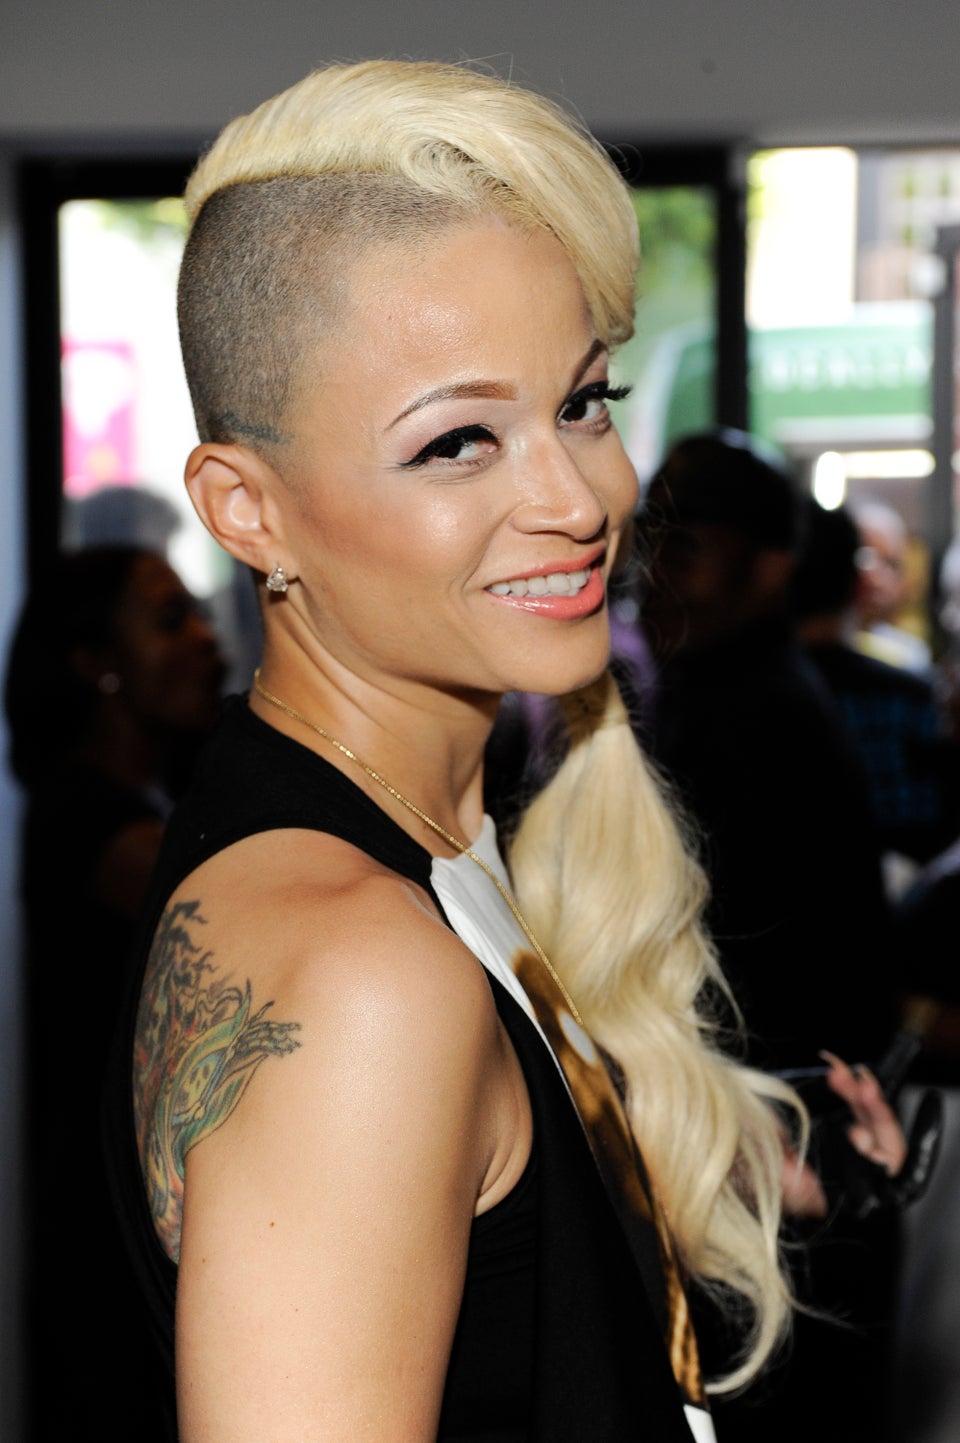 Charli Baltimore Being Treated For Rare Bone Infection Following Leg Surgery